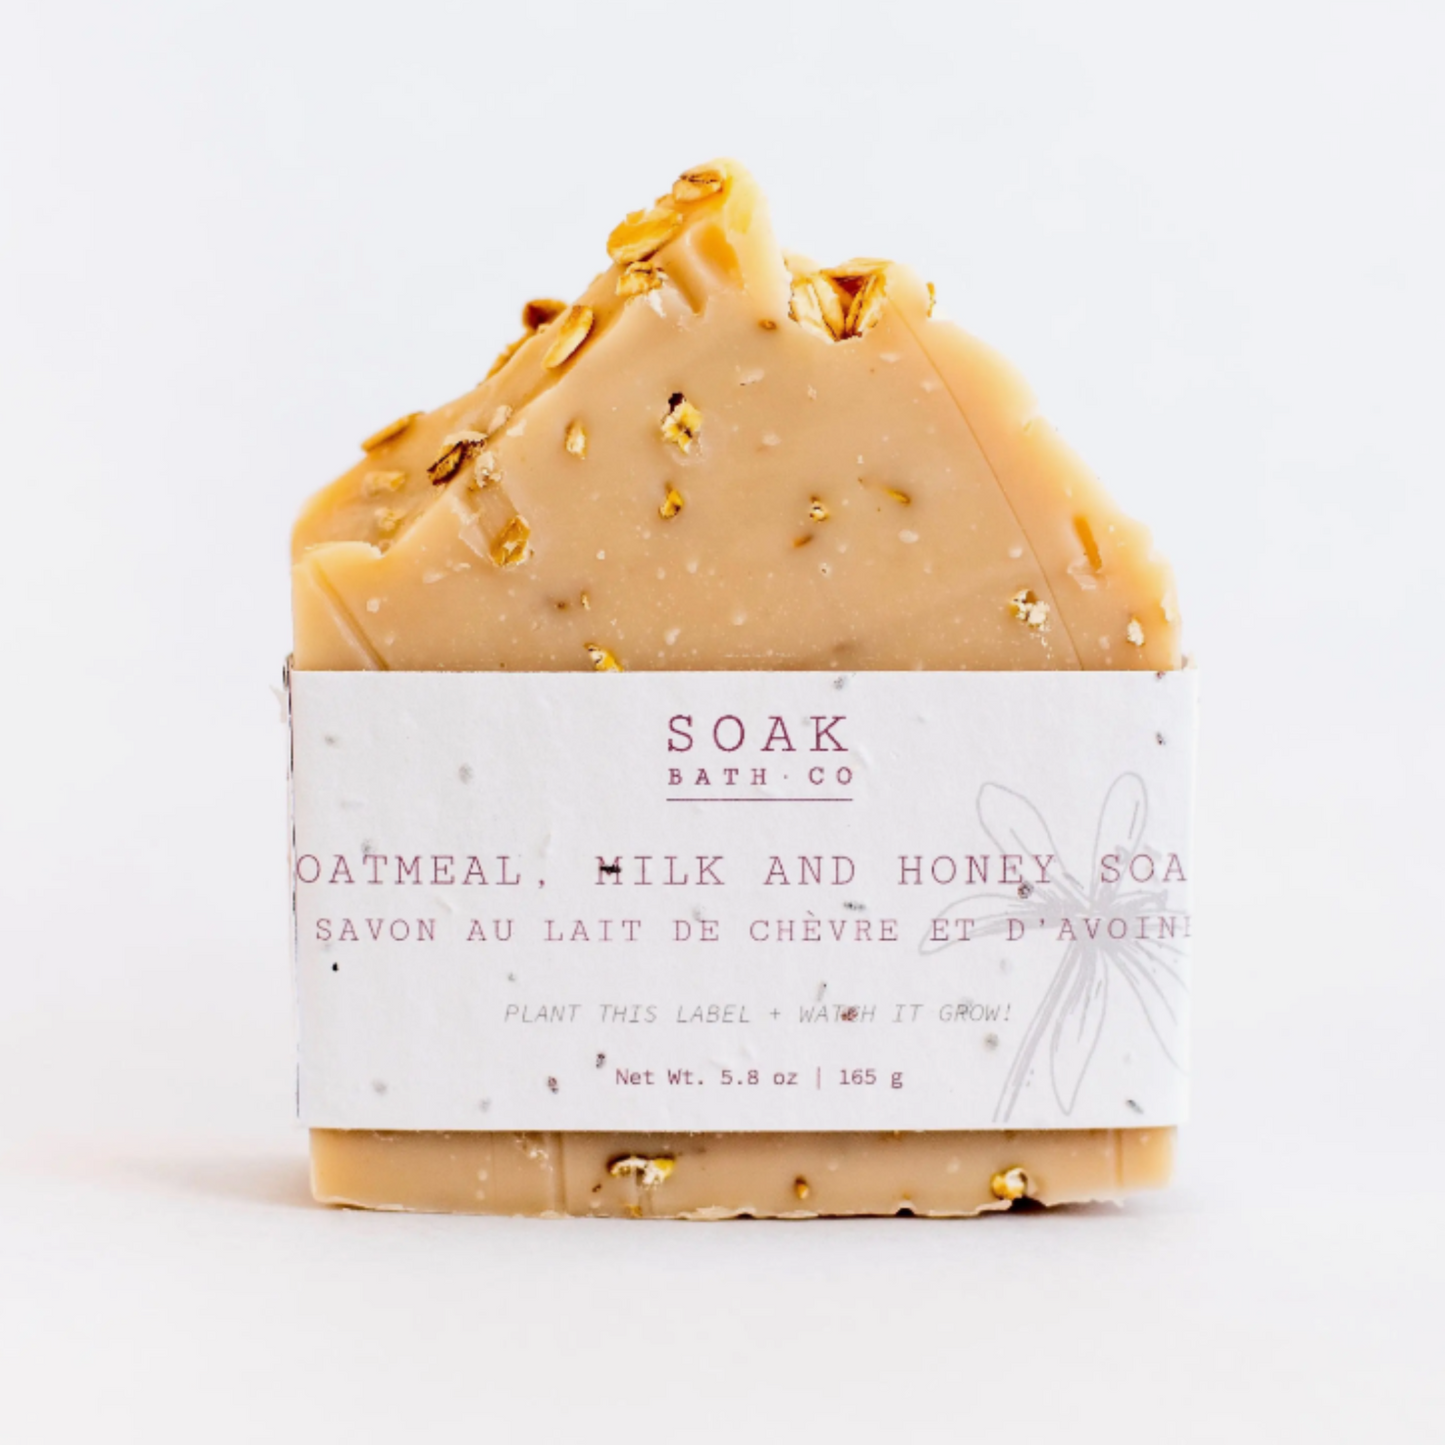 Oatmeal Milk and Honey Soap - Plantable Label